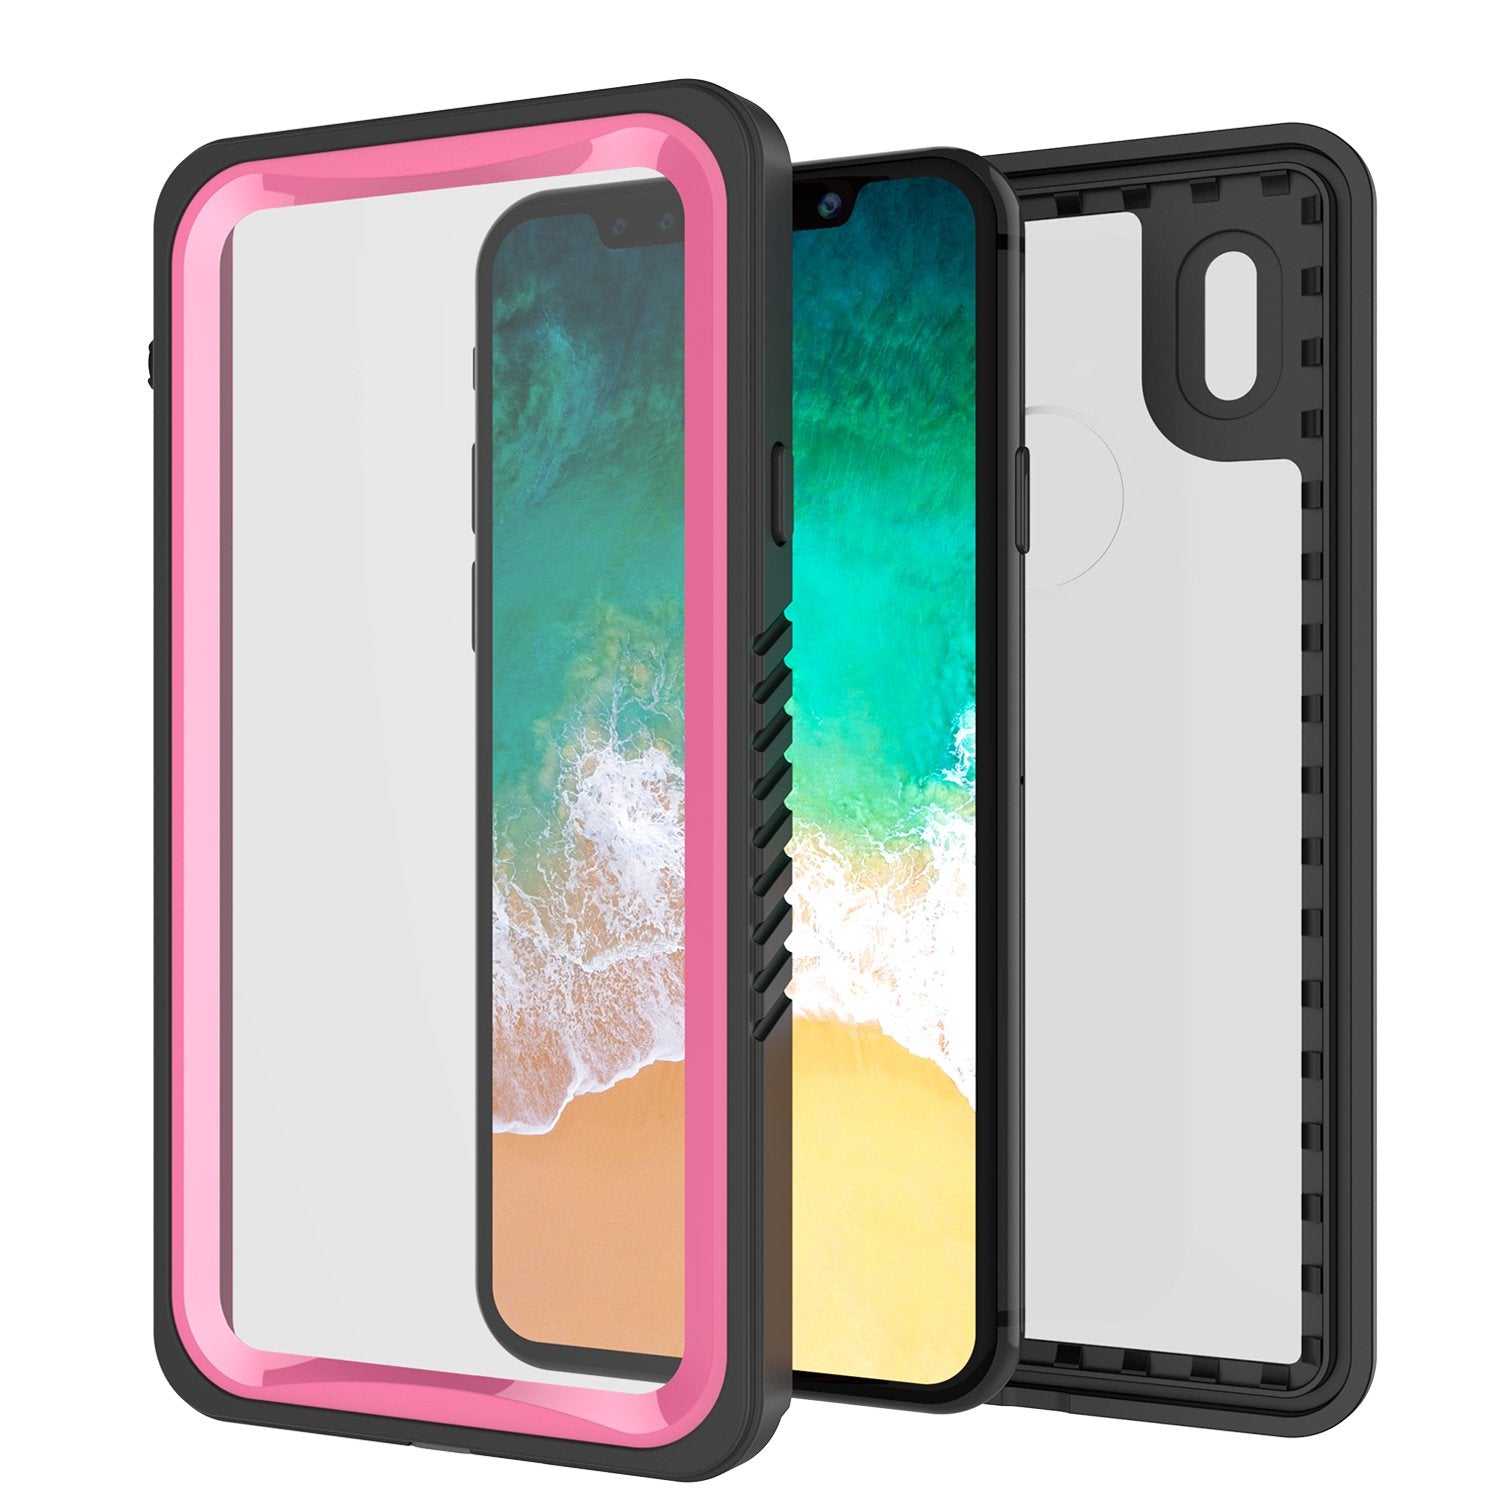 iPhone X Case, Punkcase [Extreme Series] [Slim Fit] [IP68 Certified] [Shockproof] [Snowproof] [Dirproof] Armor Cover W/ Built In Screen Protector for Apple iPhone 10 [PINK]